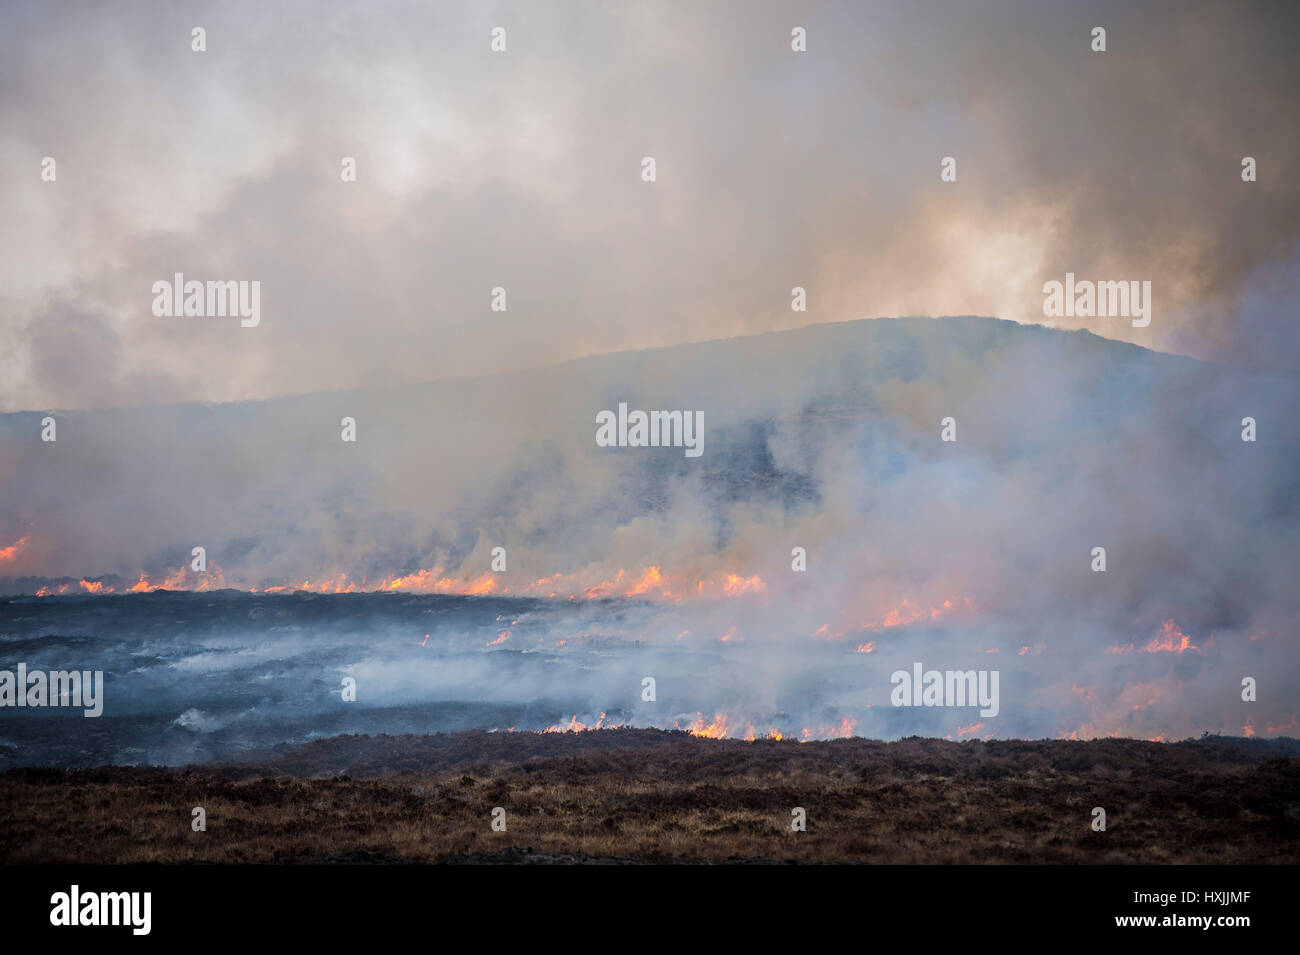 Heather burns on a hillside during a muirburn on a heather moorland near Inverness. Muirburn is controlled heather burning and is considered an important land management practice. Stock Photo